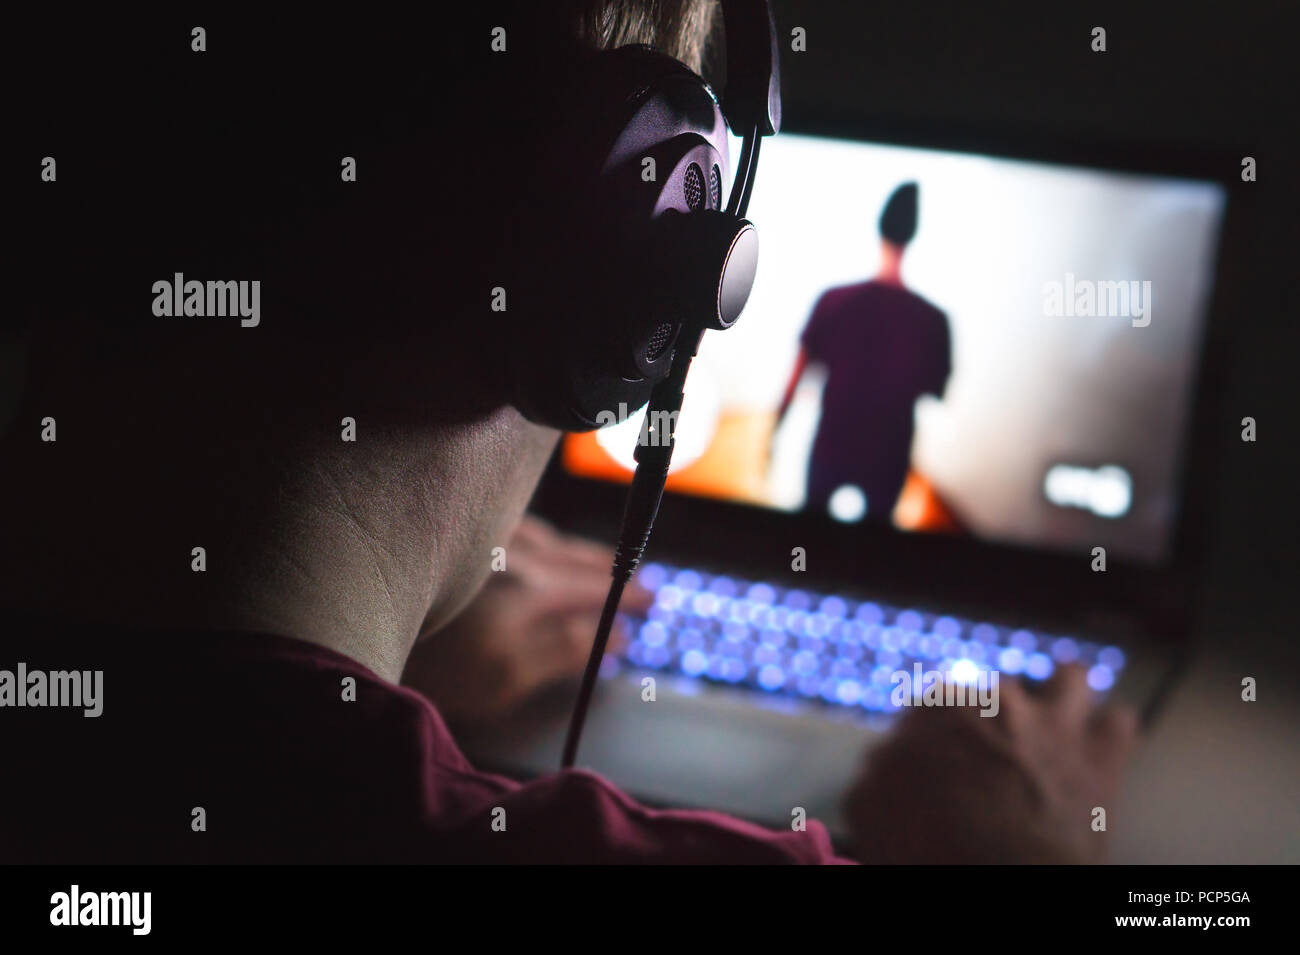 Playing video games with laptop. Young man plays action game on computer. Back view of gamer with headphones in dark or late at night. Stock Photo